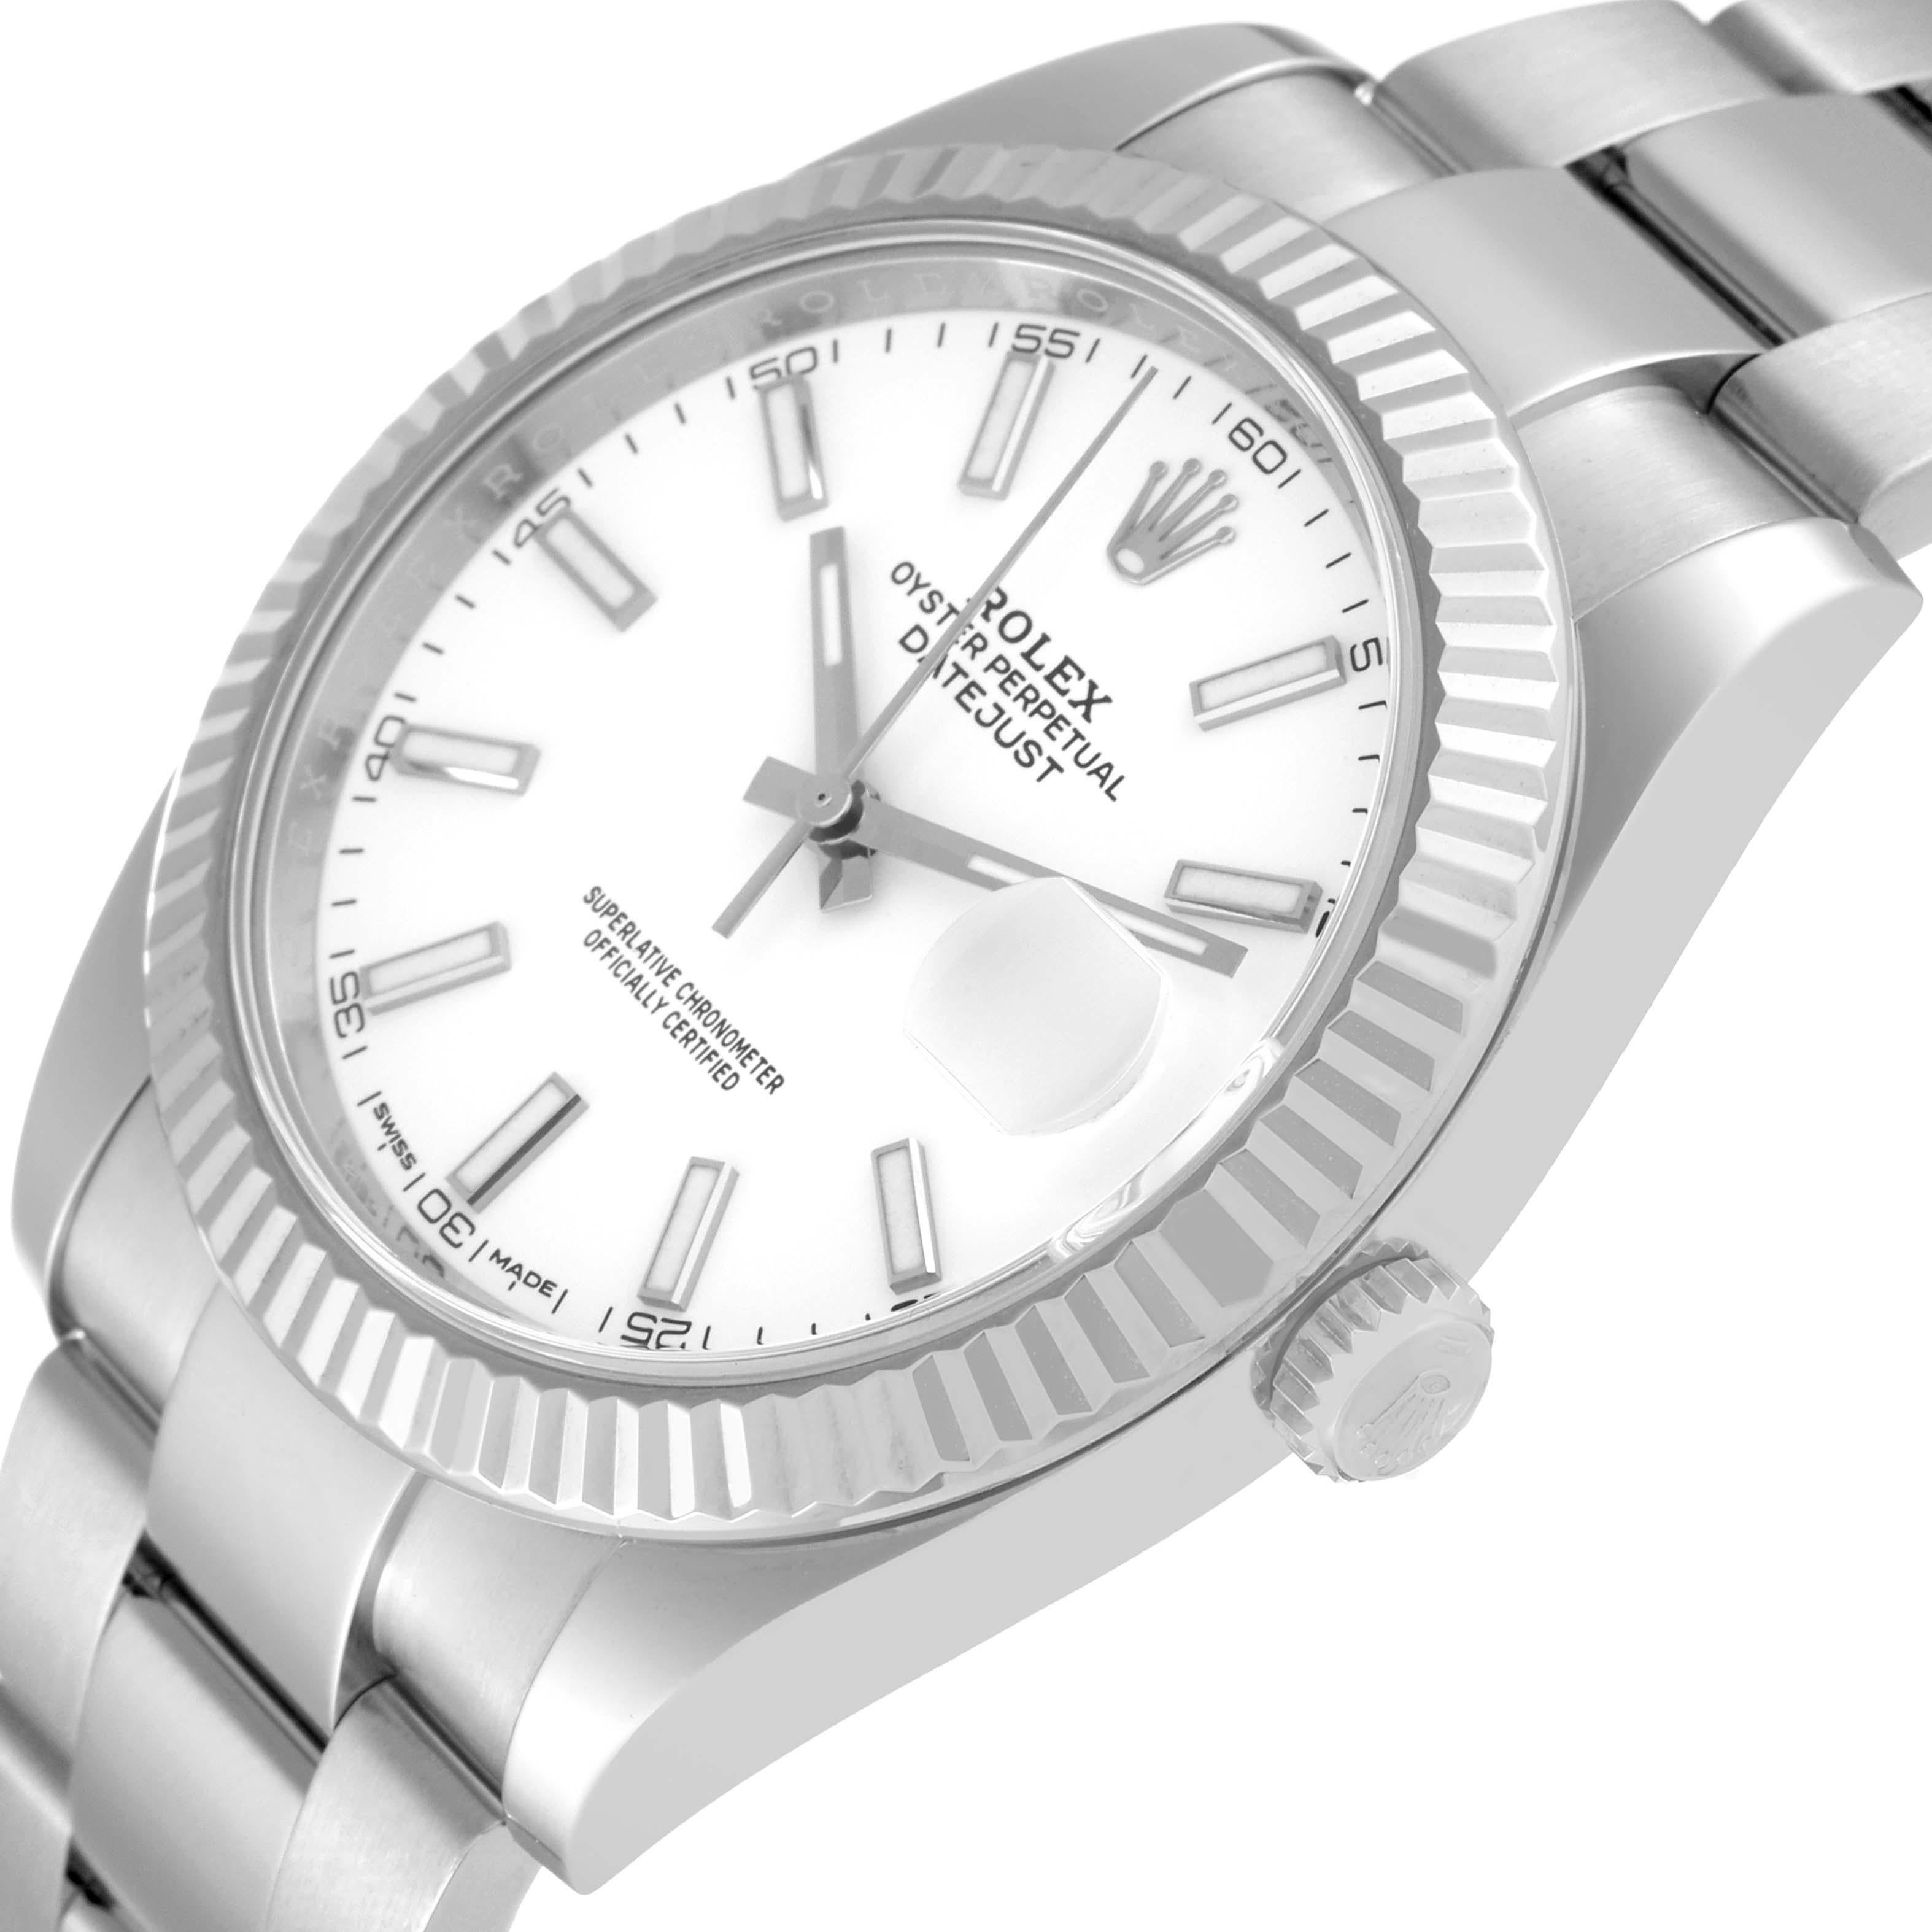 Rolex Datejust 41 Steel White Dial Oyster Bracelet Mens Watch 126334 Box Card For Sale 1